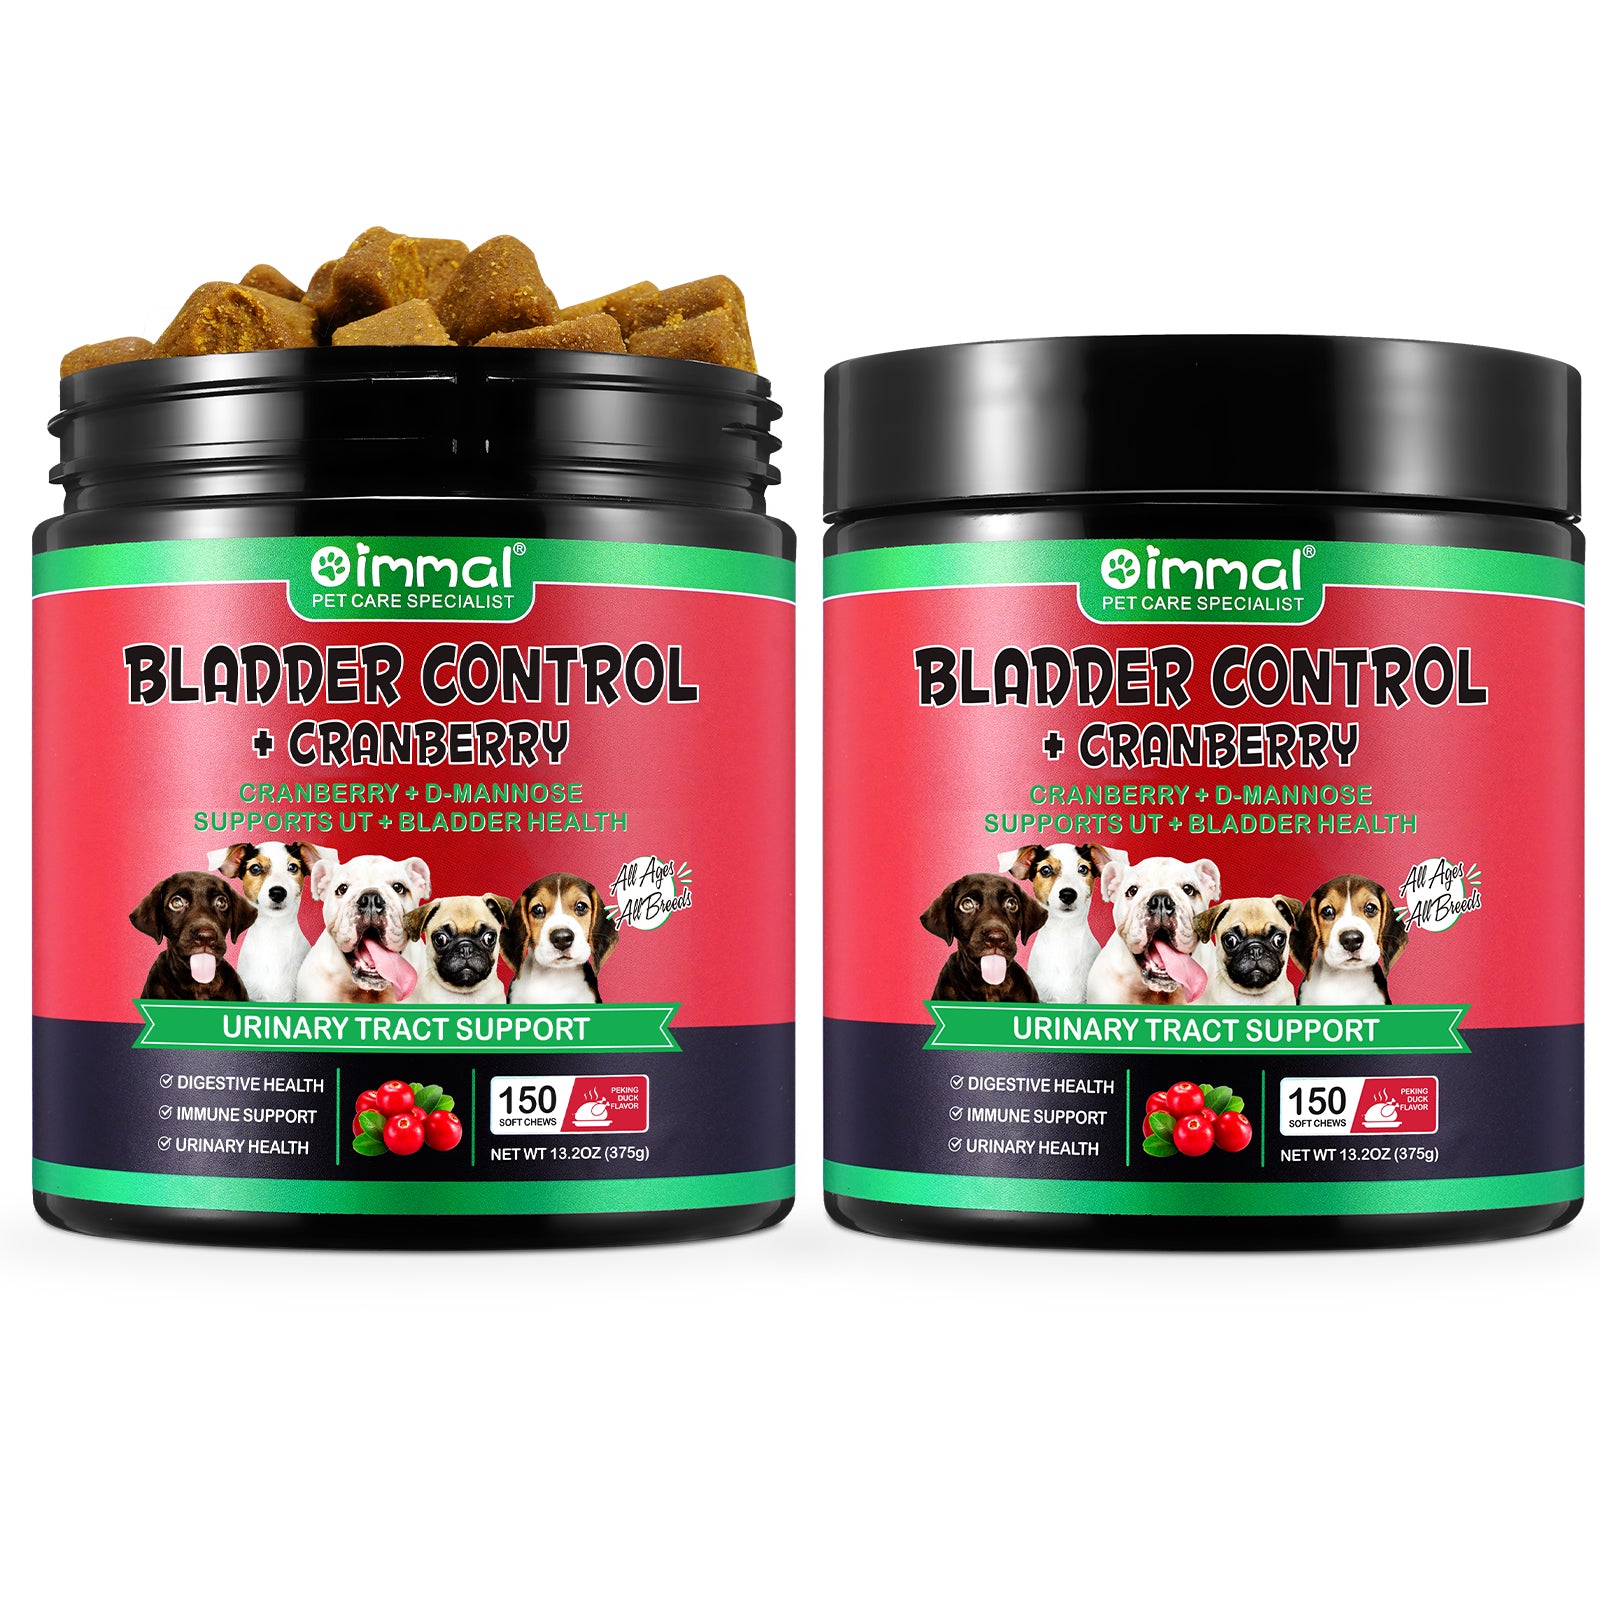 Oimmal Bladder Control + Cranberry for Dogs